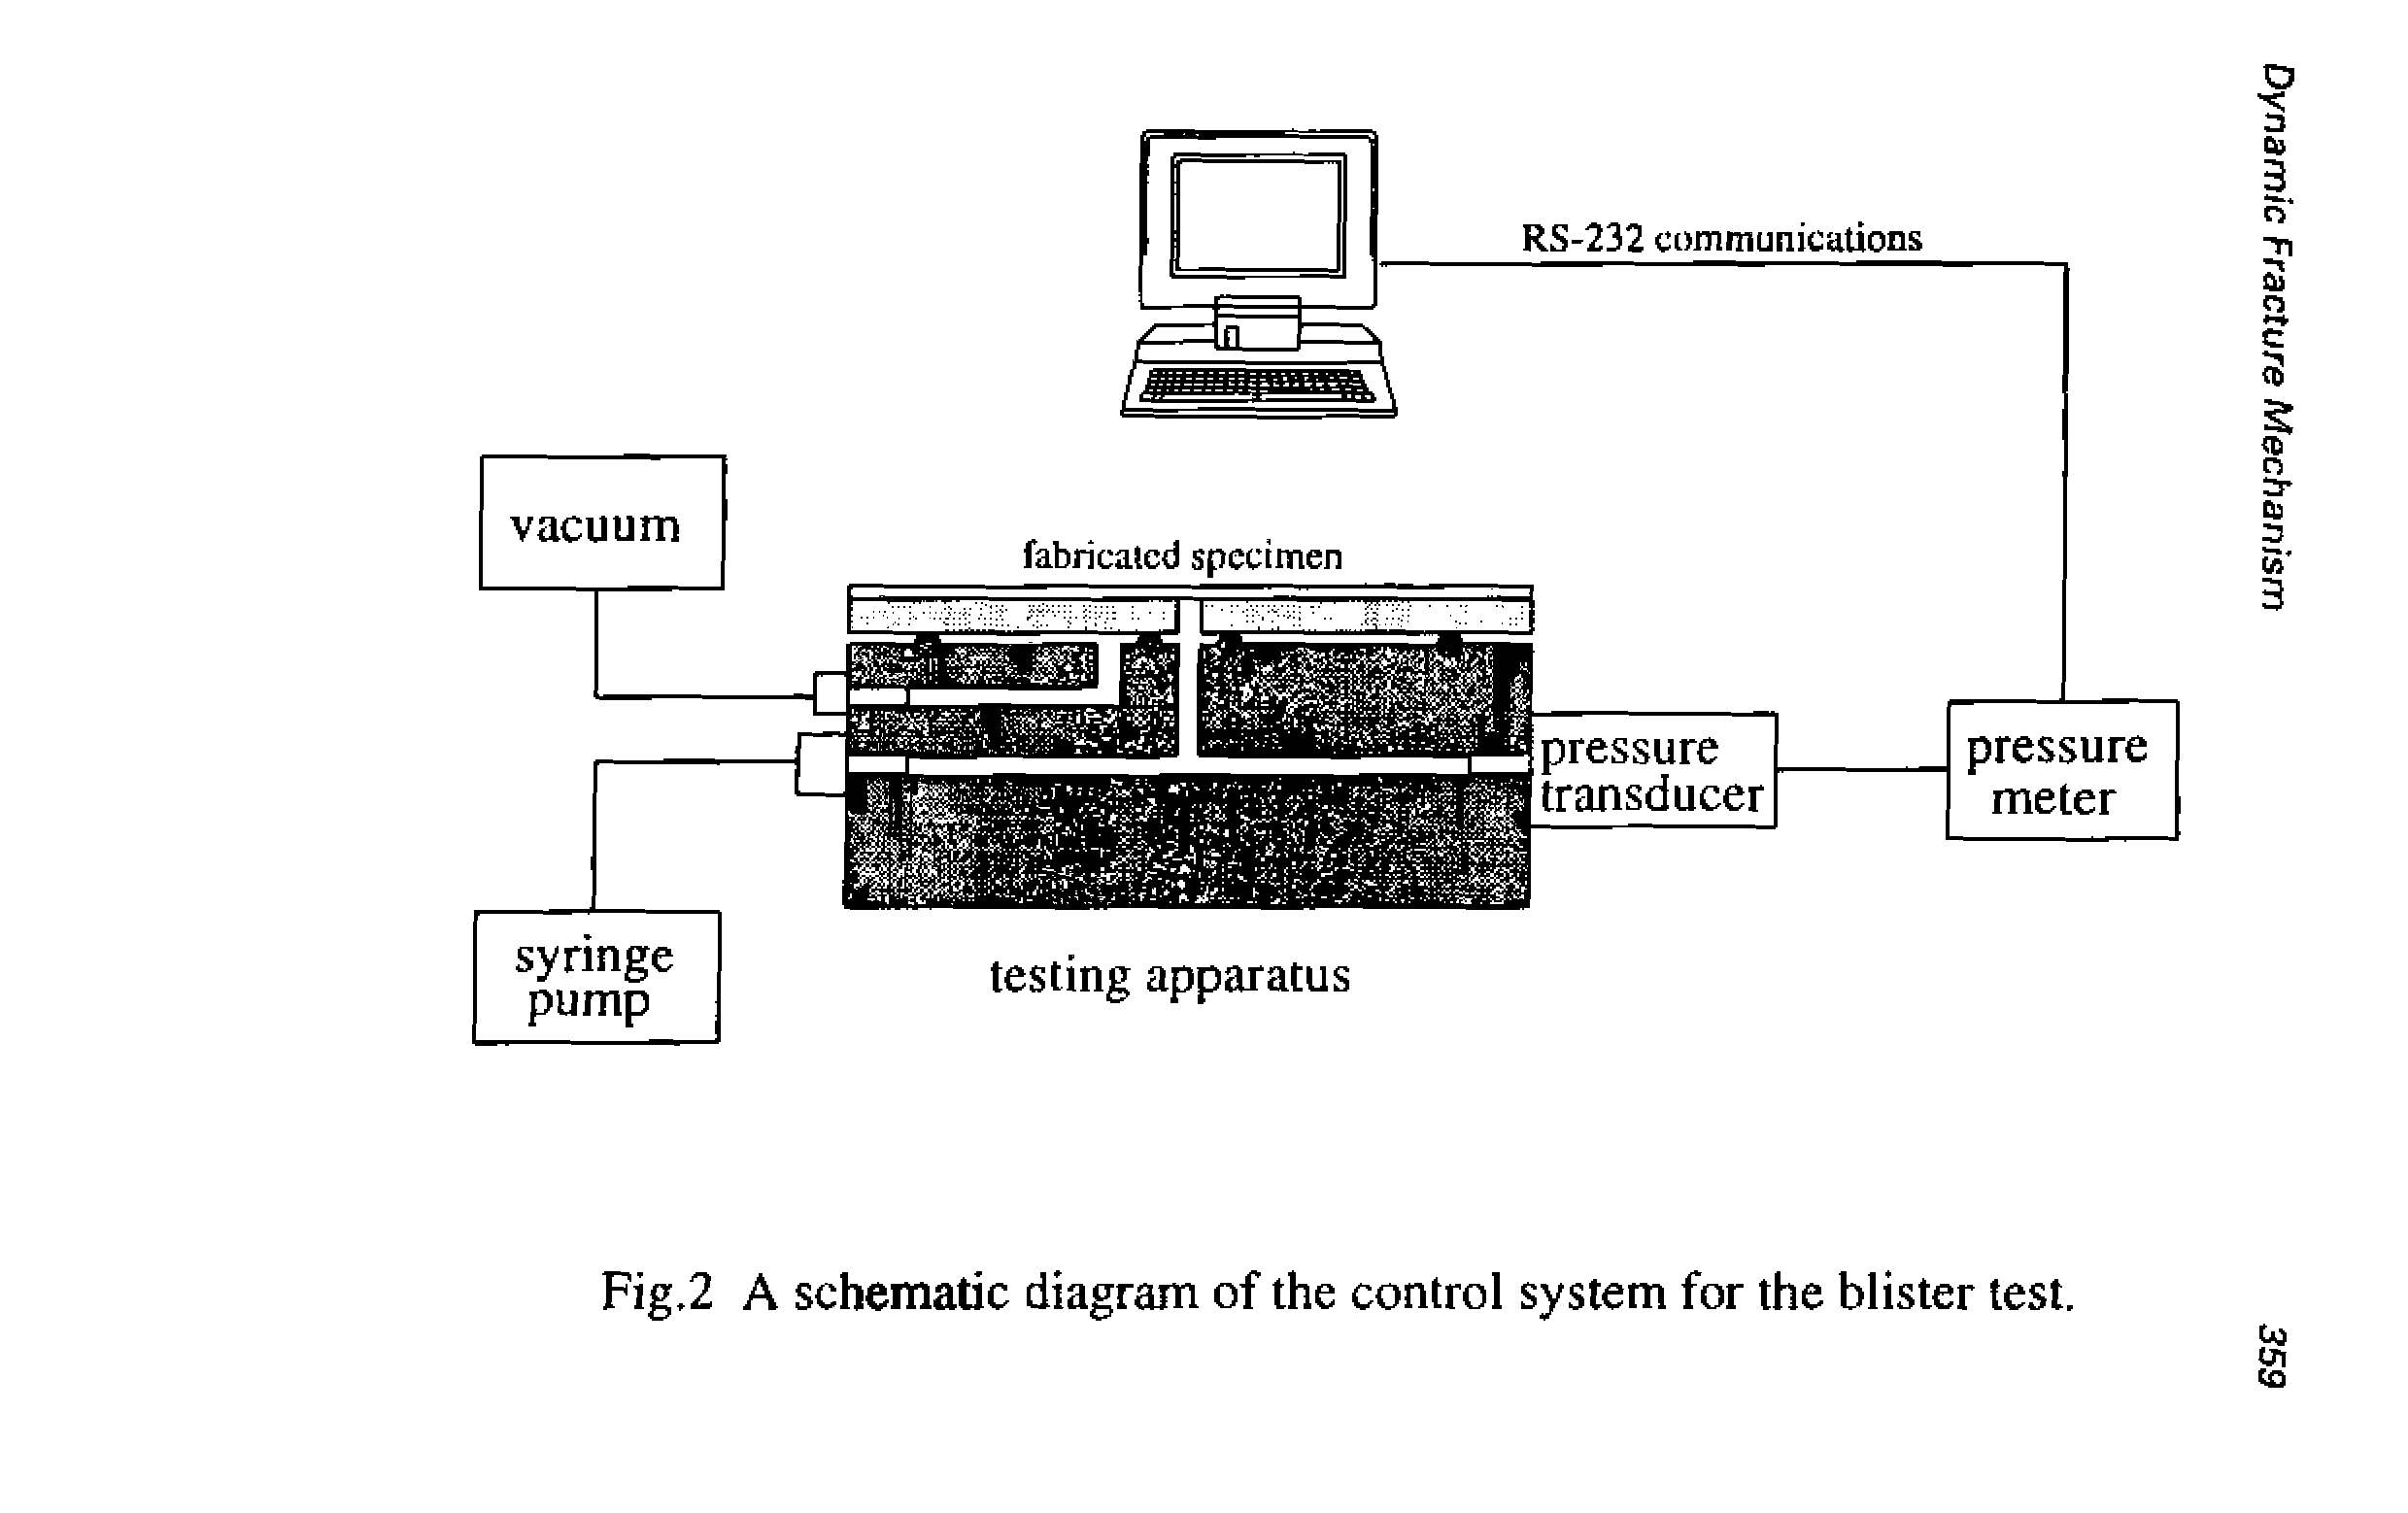 Fig.2 A schematic diagram of the control system for the blister test.